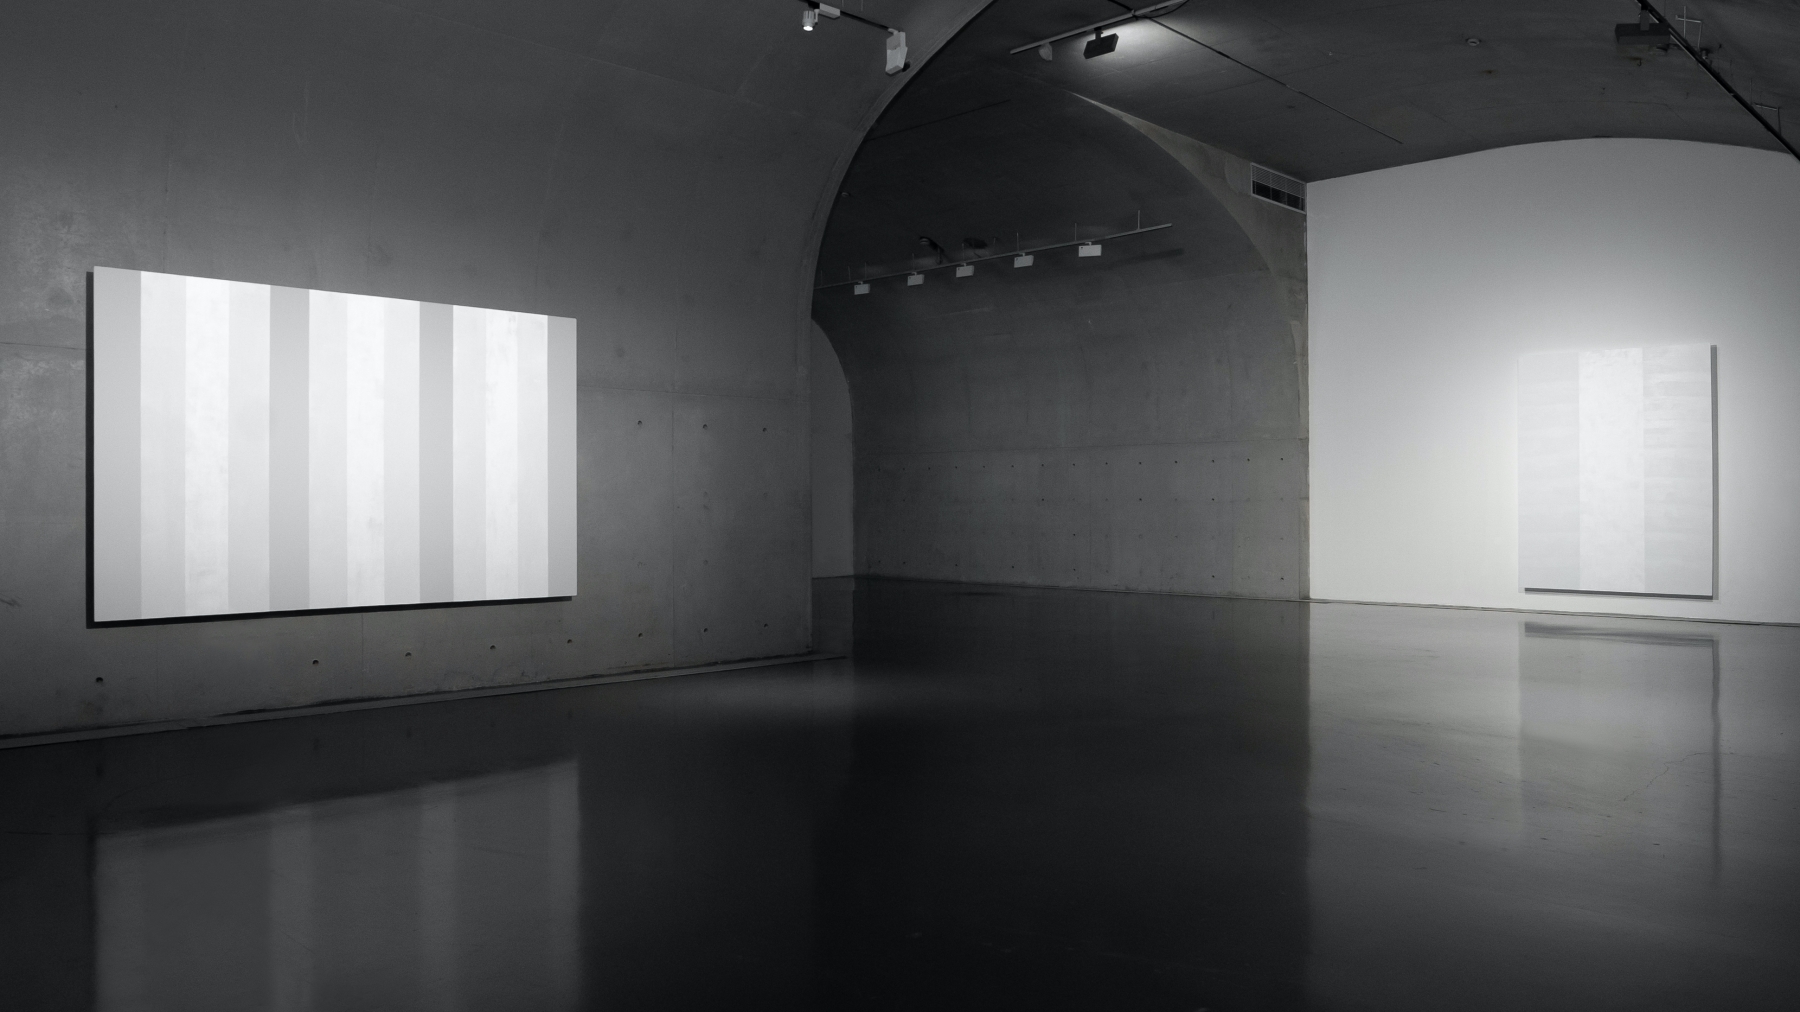 Installation view of Mary Corse: Painting with Light, Long Museum, West Bund